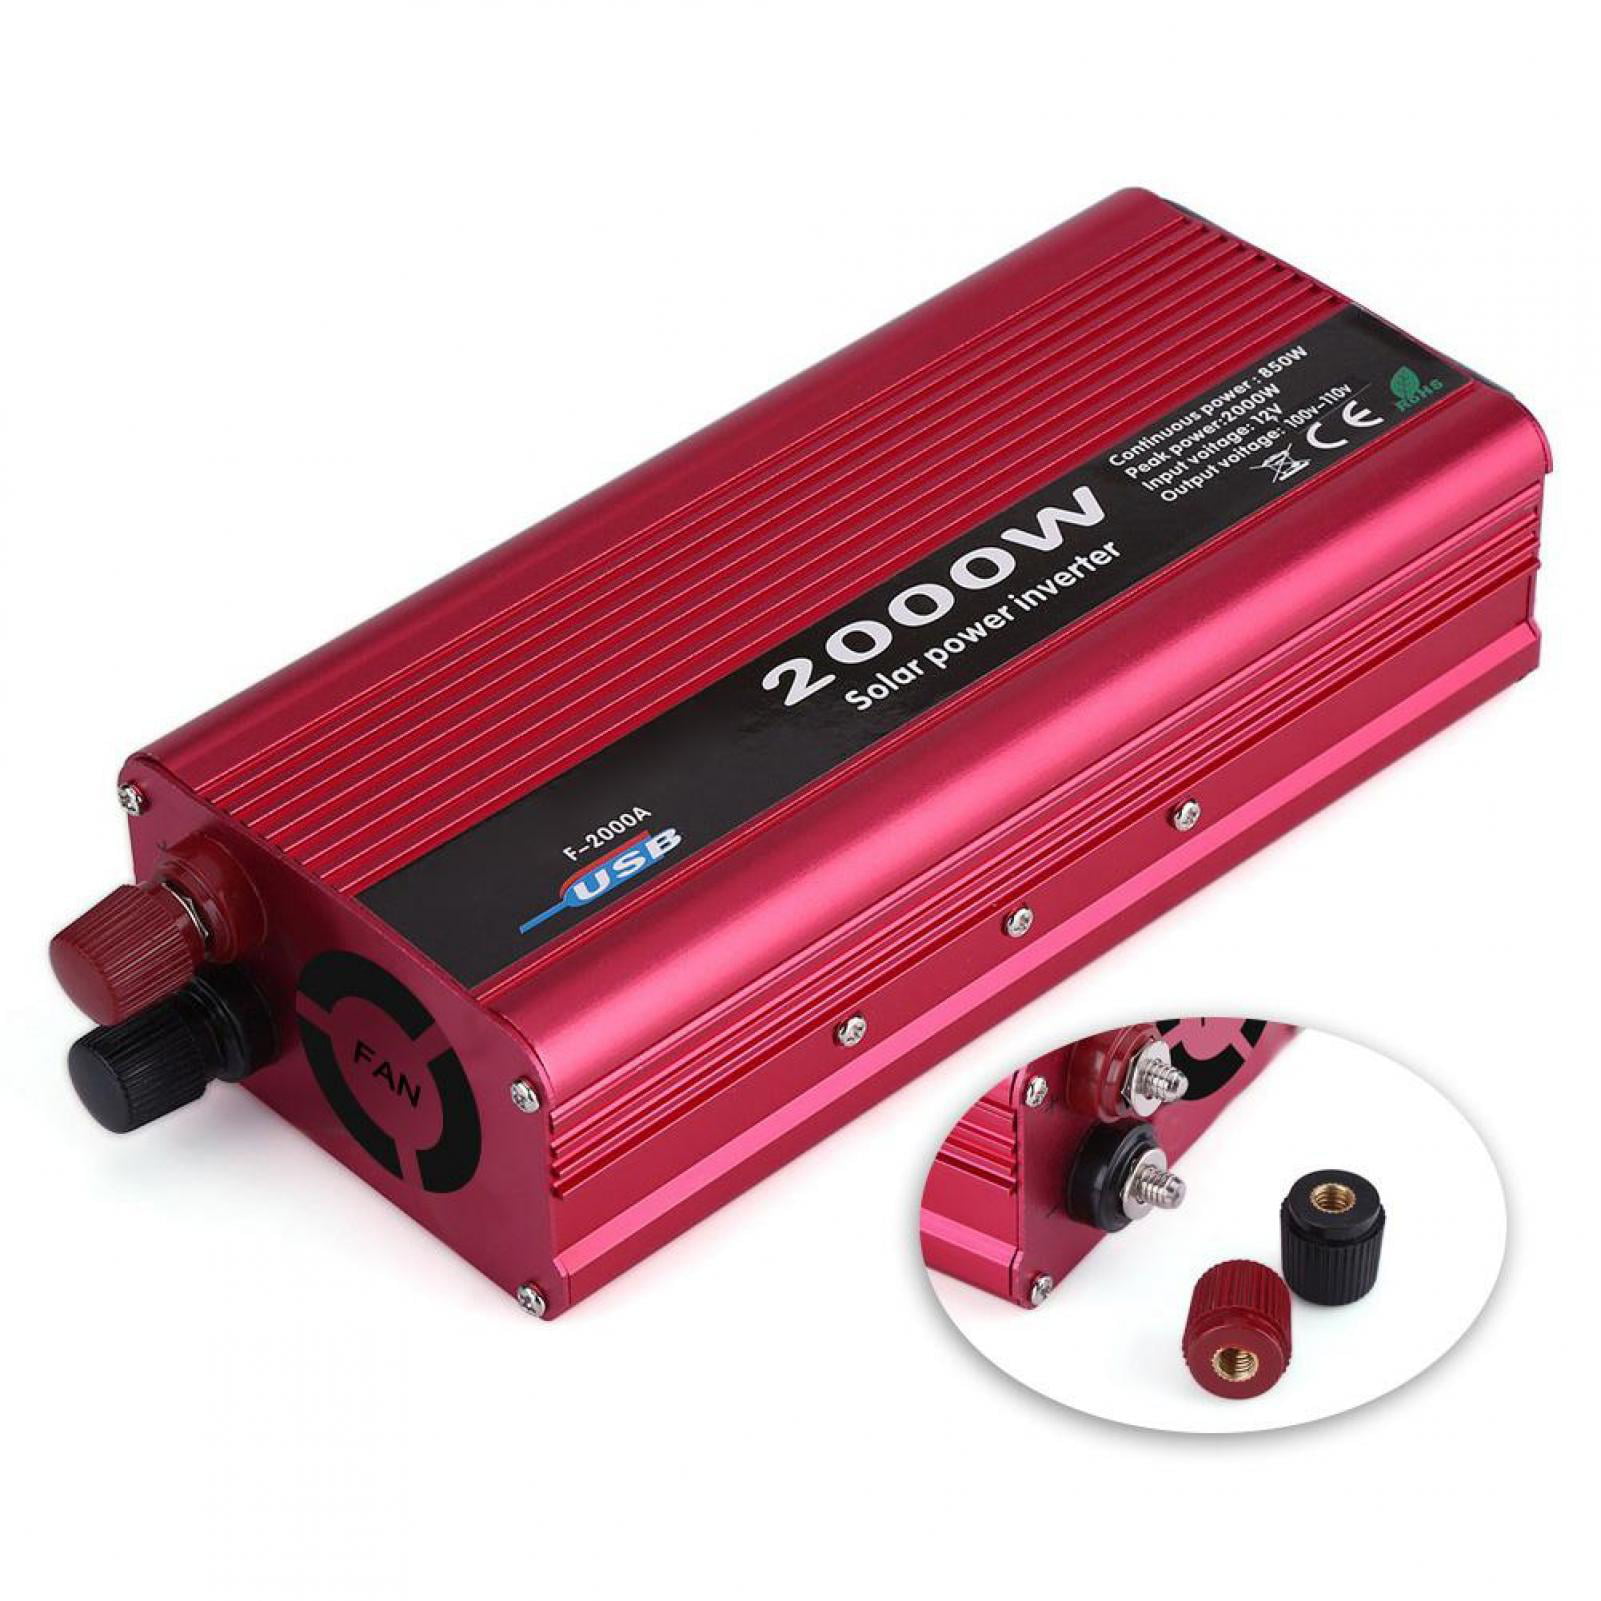 2000W Car Converter Power Inverter DC 12V to AC 110V invertor with USB Charger 